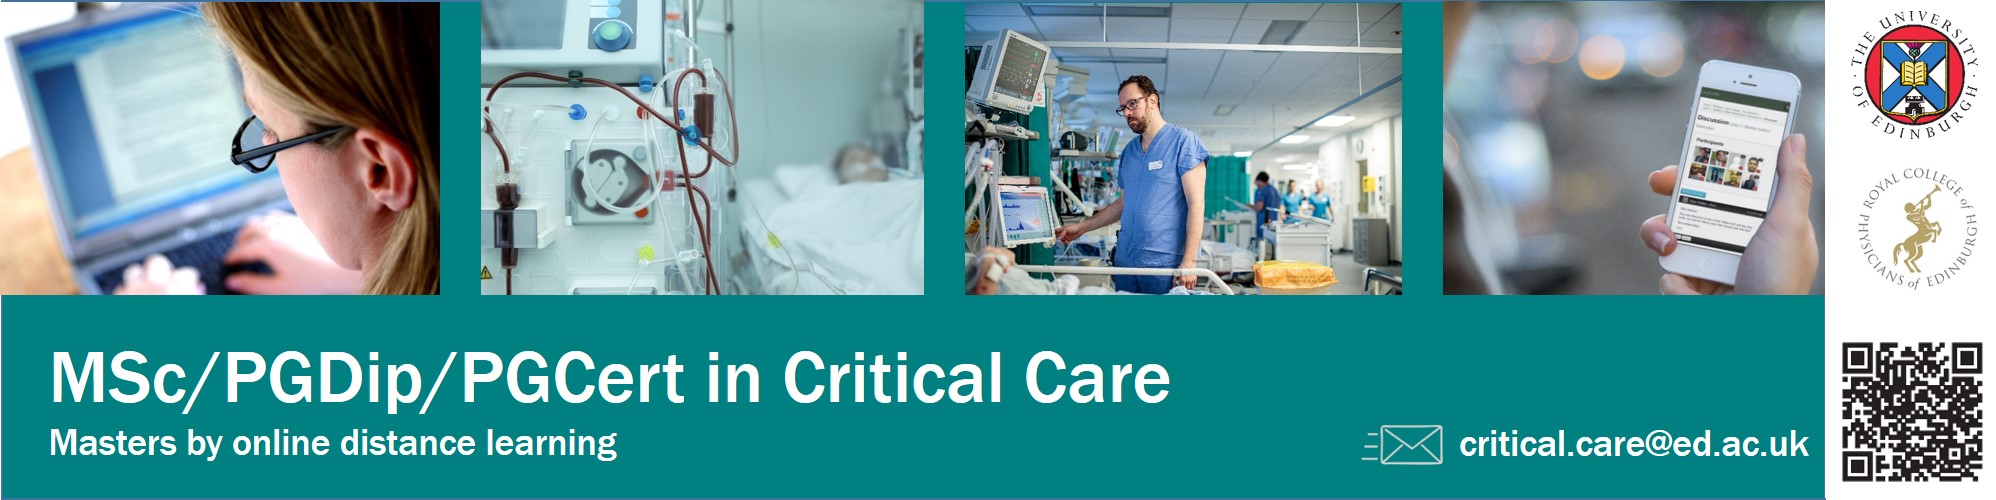 Banner for the MSc in Critical Care programme ran by the University of Edinburgh and RCPE